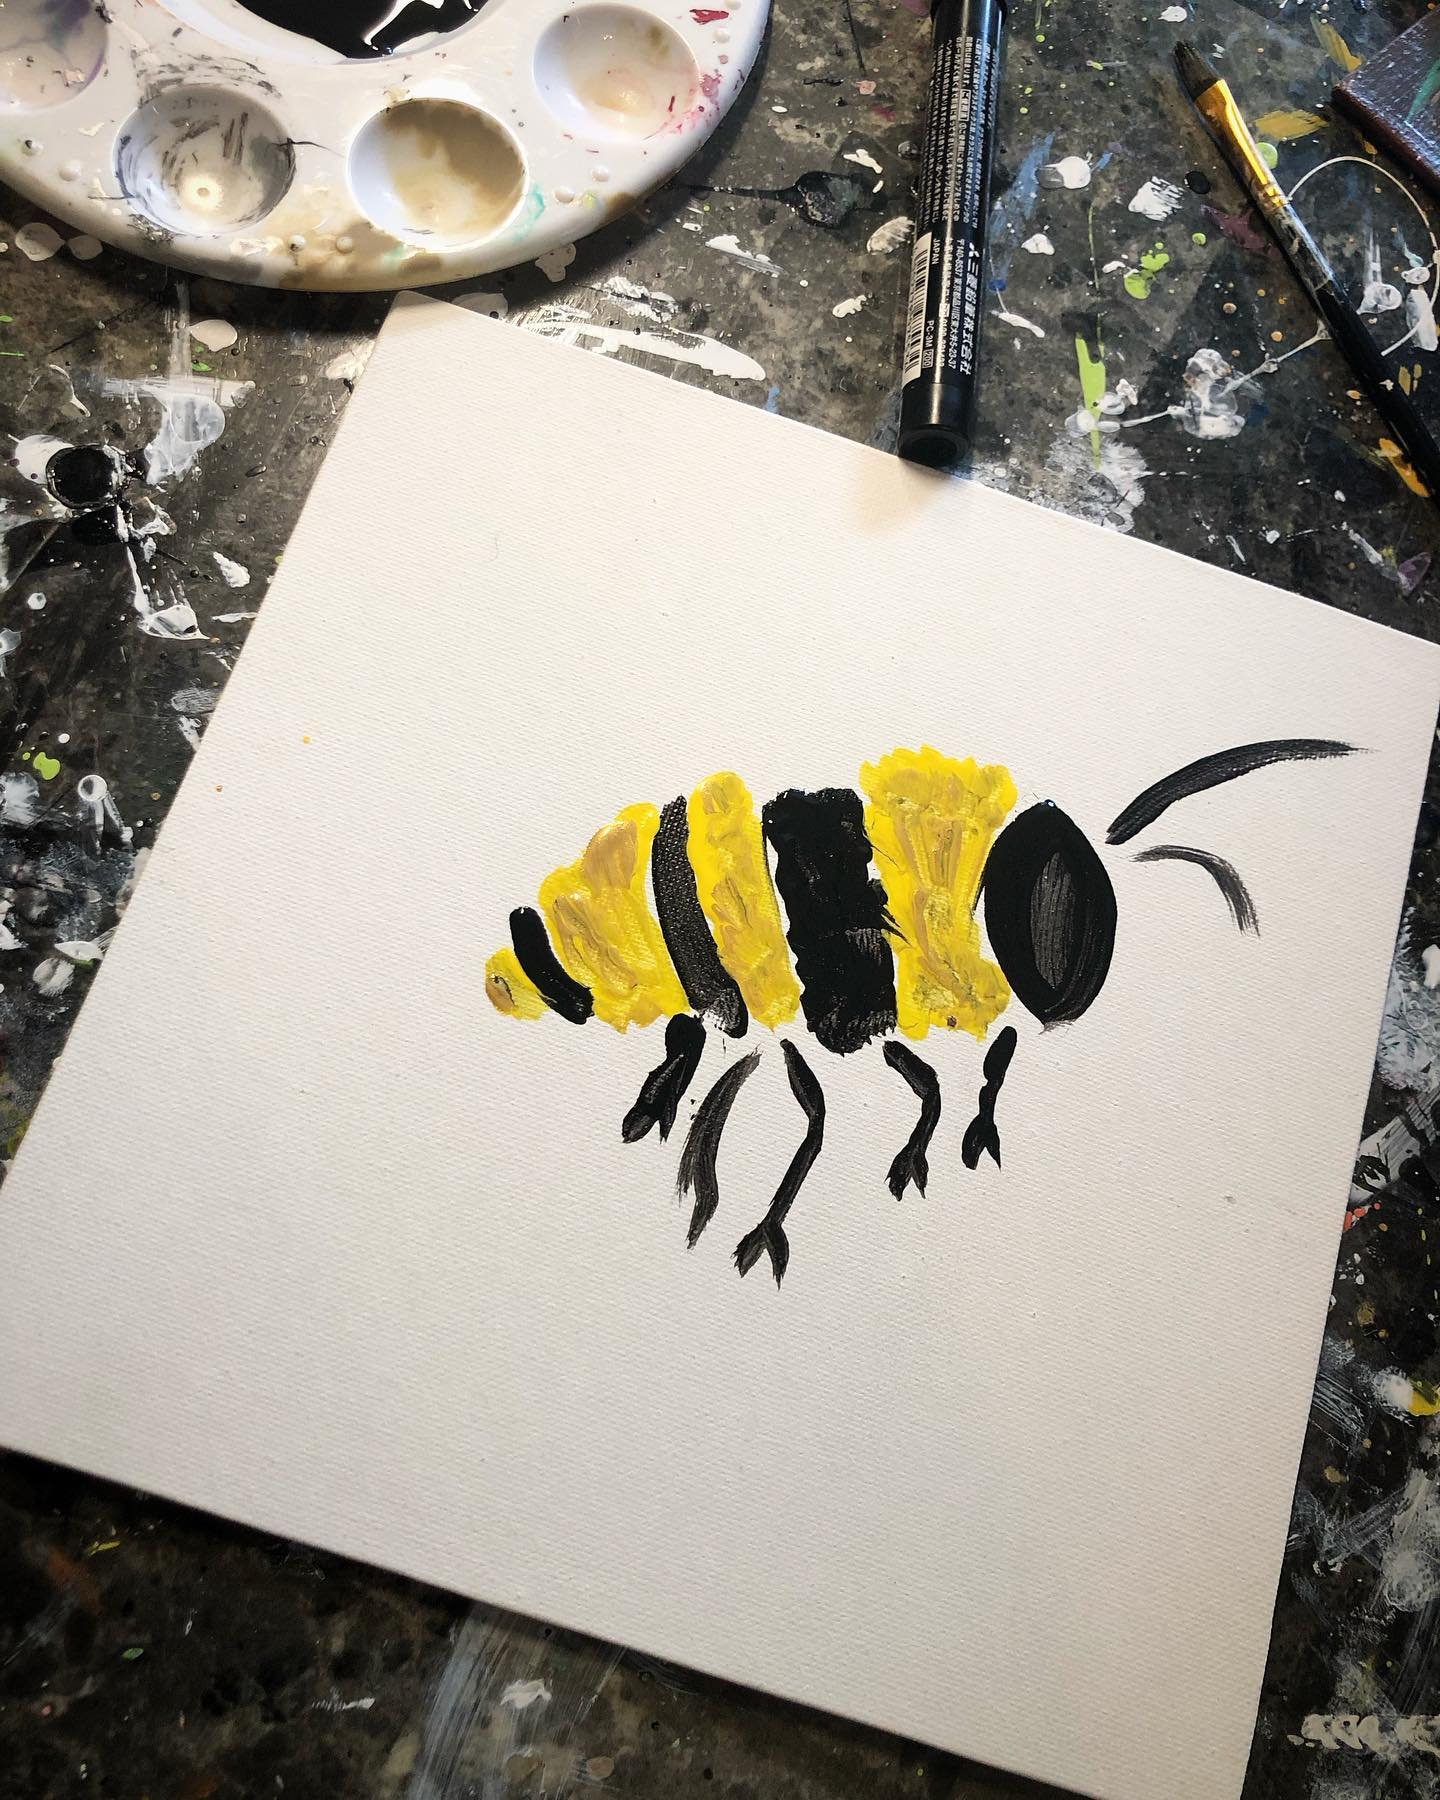 Test Run. 

I&rsquo;m going to be working on a pretty big piece, coming up and trying to incorporate some bees 😊 not bad for my first attempt, but there will be more practicing for sure. 

This little guy will become a piece of his own as well. No p